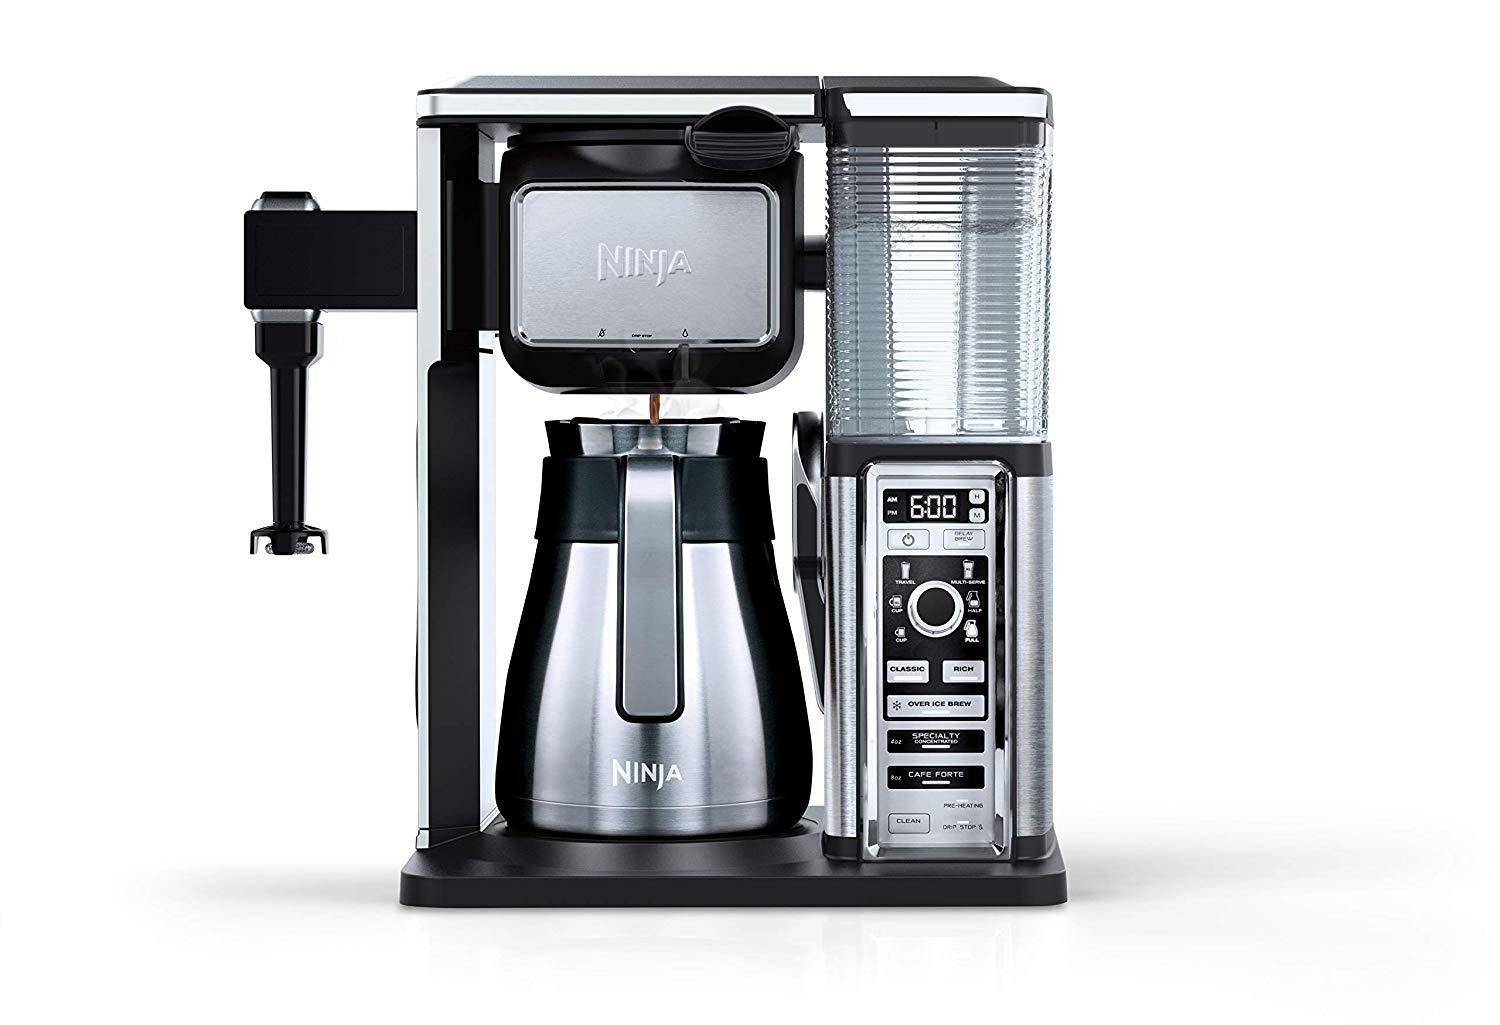 Ninja CF097 Coffee Bar Auto-iQ Programmable Coffee Maker with 6 Brew Sizes, 5 Brew Options, Milk Frother, Removable Water Reservoir, Stainless Carafe